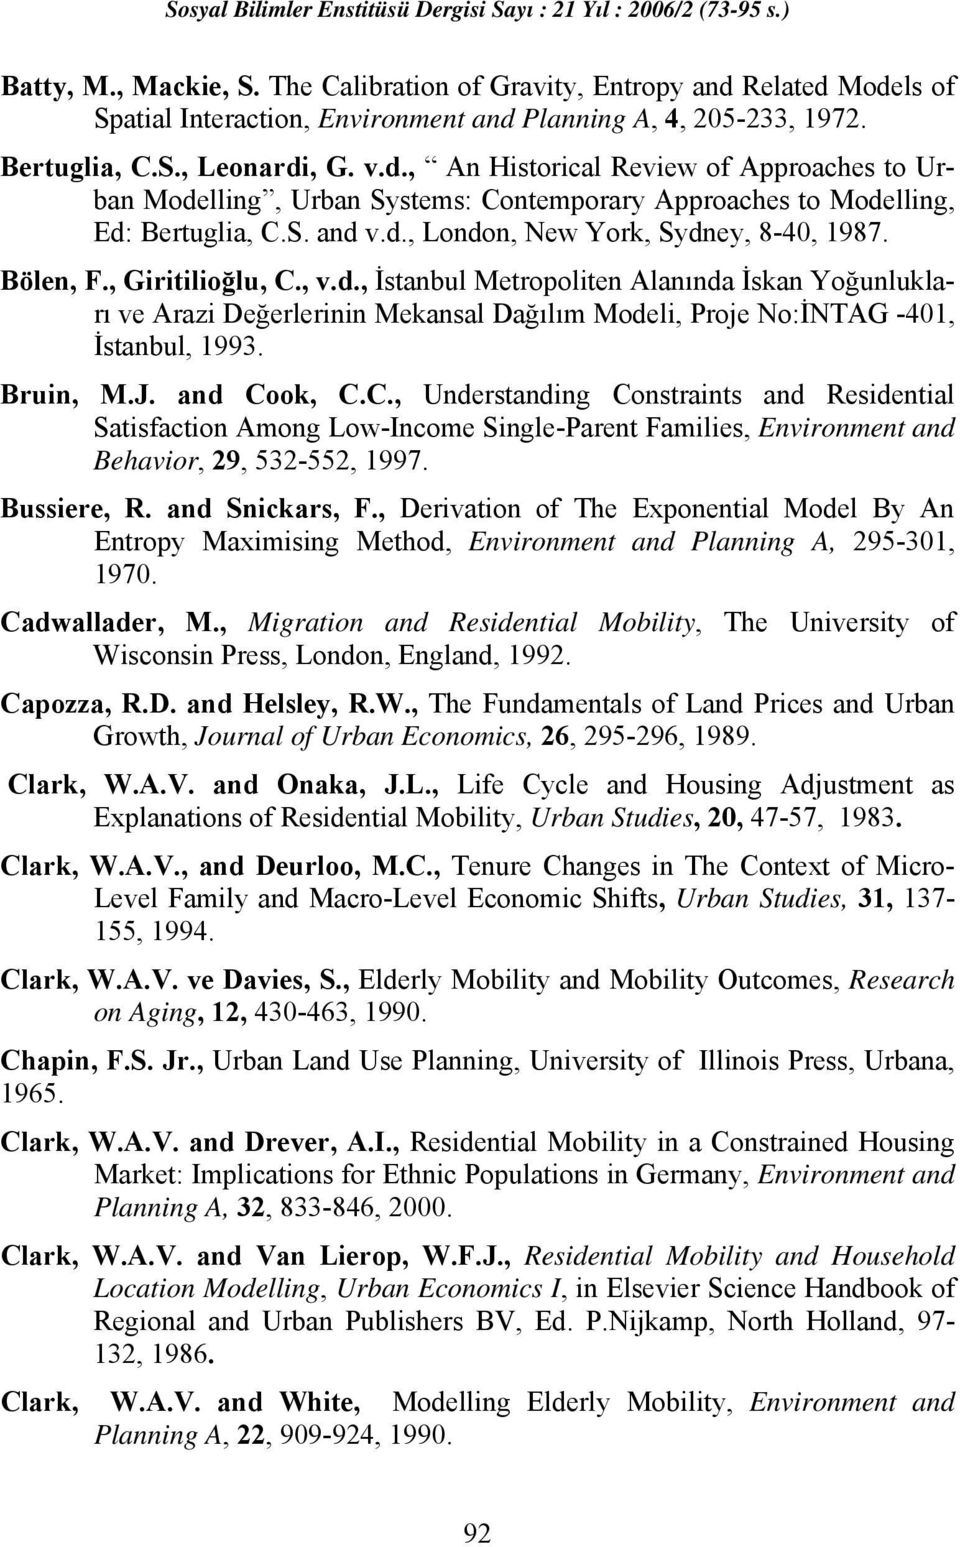 Bruin, M.J. and Cook, C.C., Understanding Constraints and Residential Satisfaction Among Low-Income Single-Parent Families, Environment and Behavior, 29, 532-552, 1997. Bussiere, R. and Snickars, F.